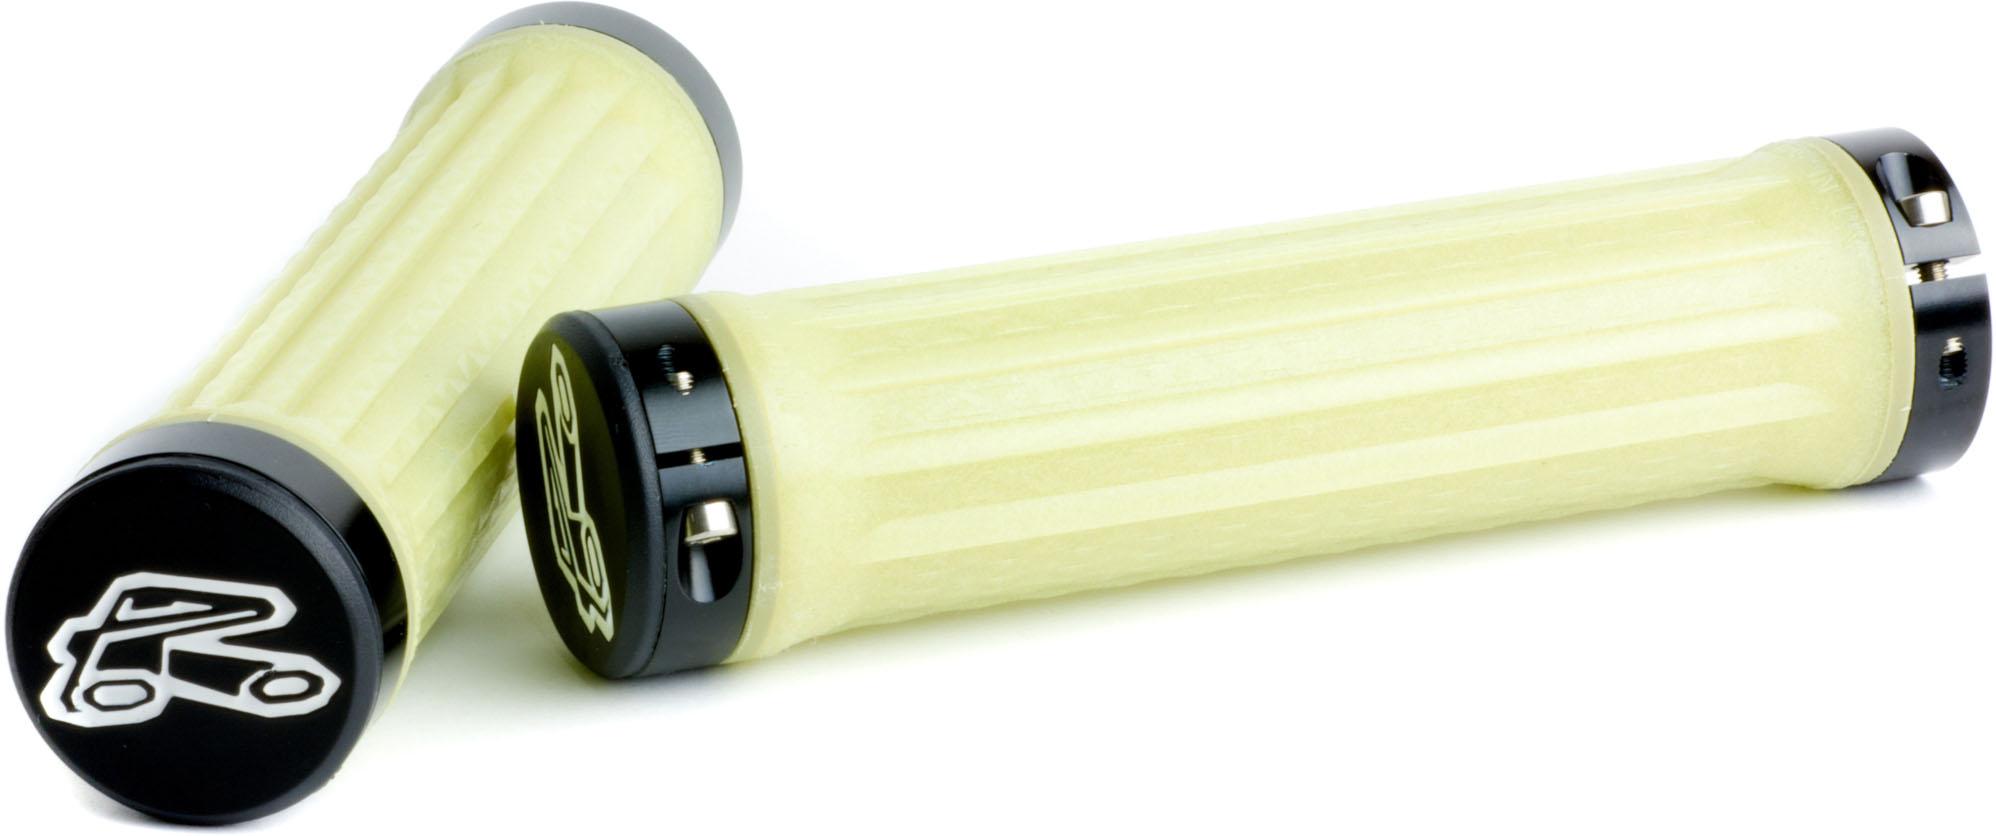 Renthal Lock-on Traction Grips - Yellow